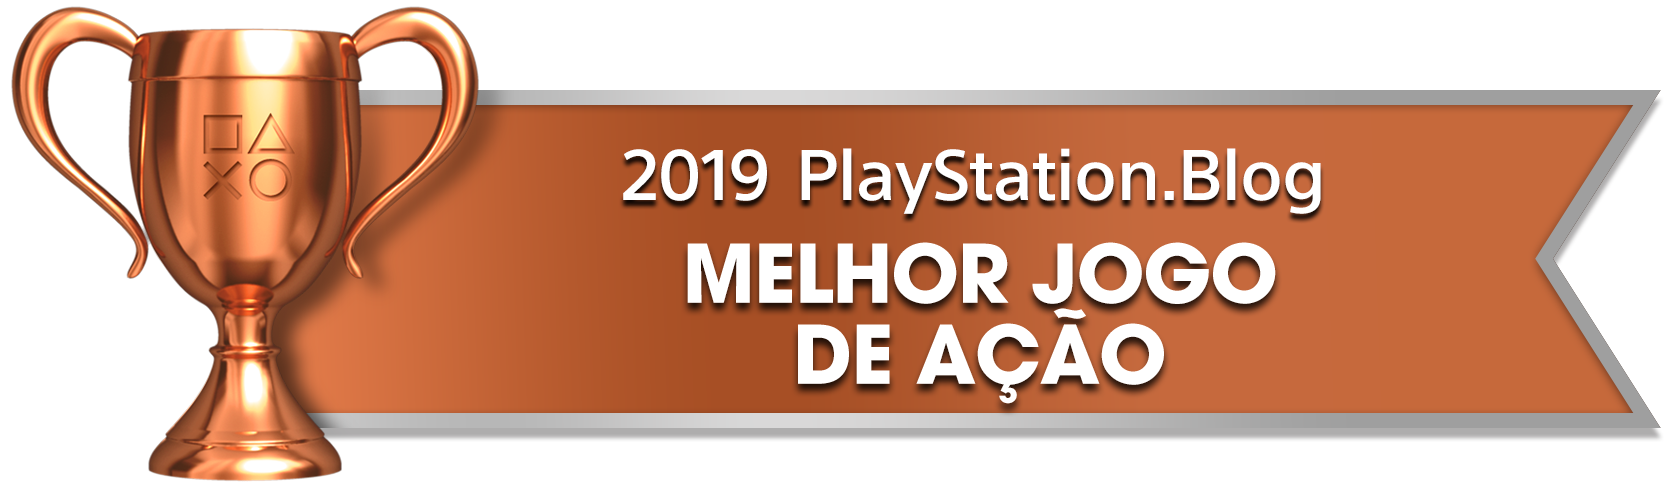 PS Blog Game of the Year 2019 - Best Action Game - 4 - Bronze